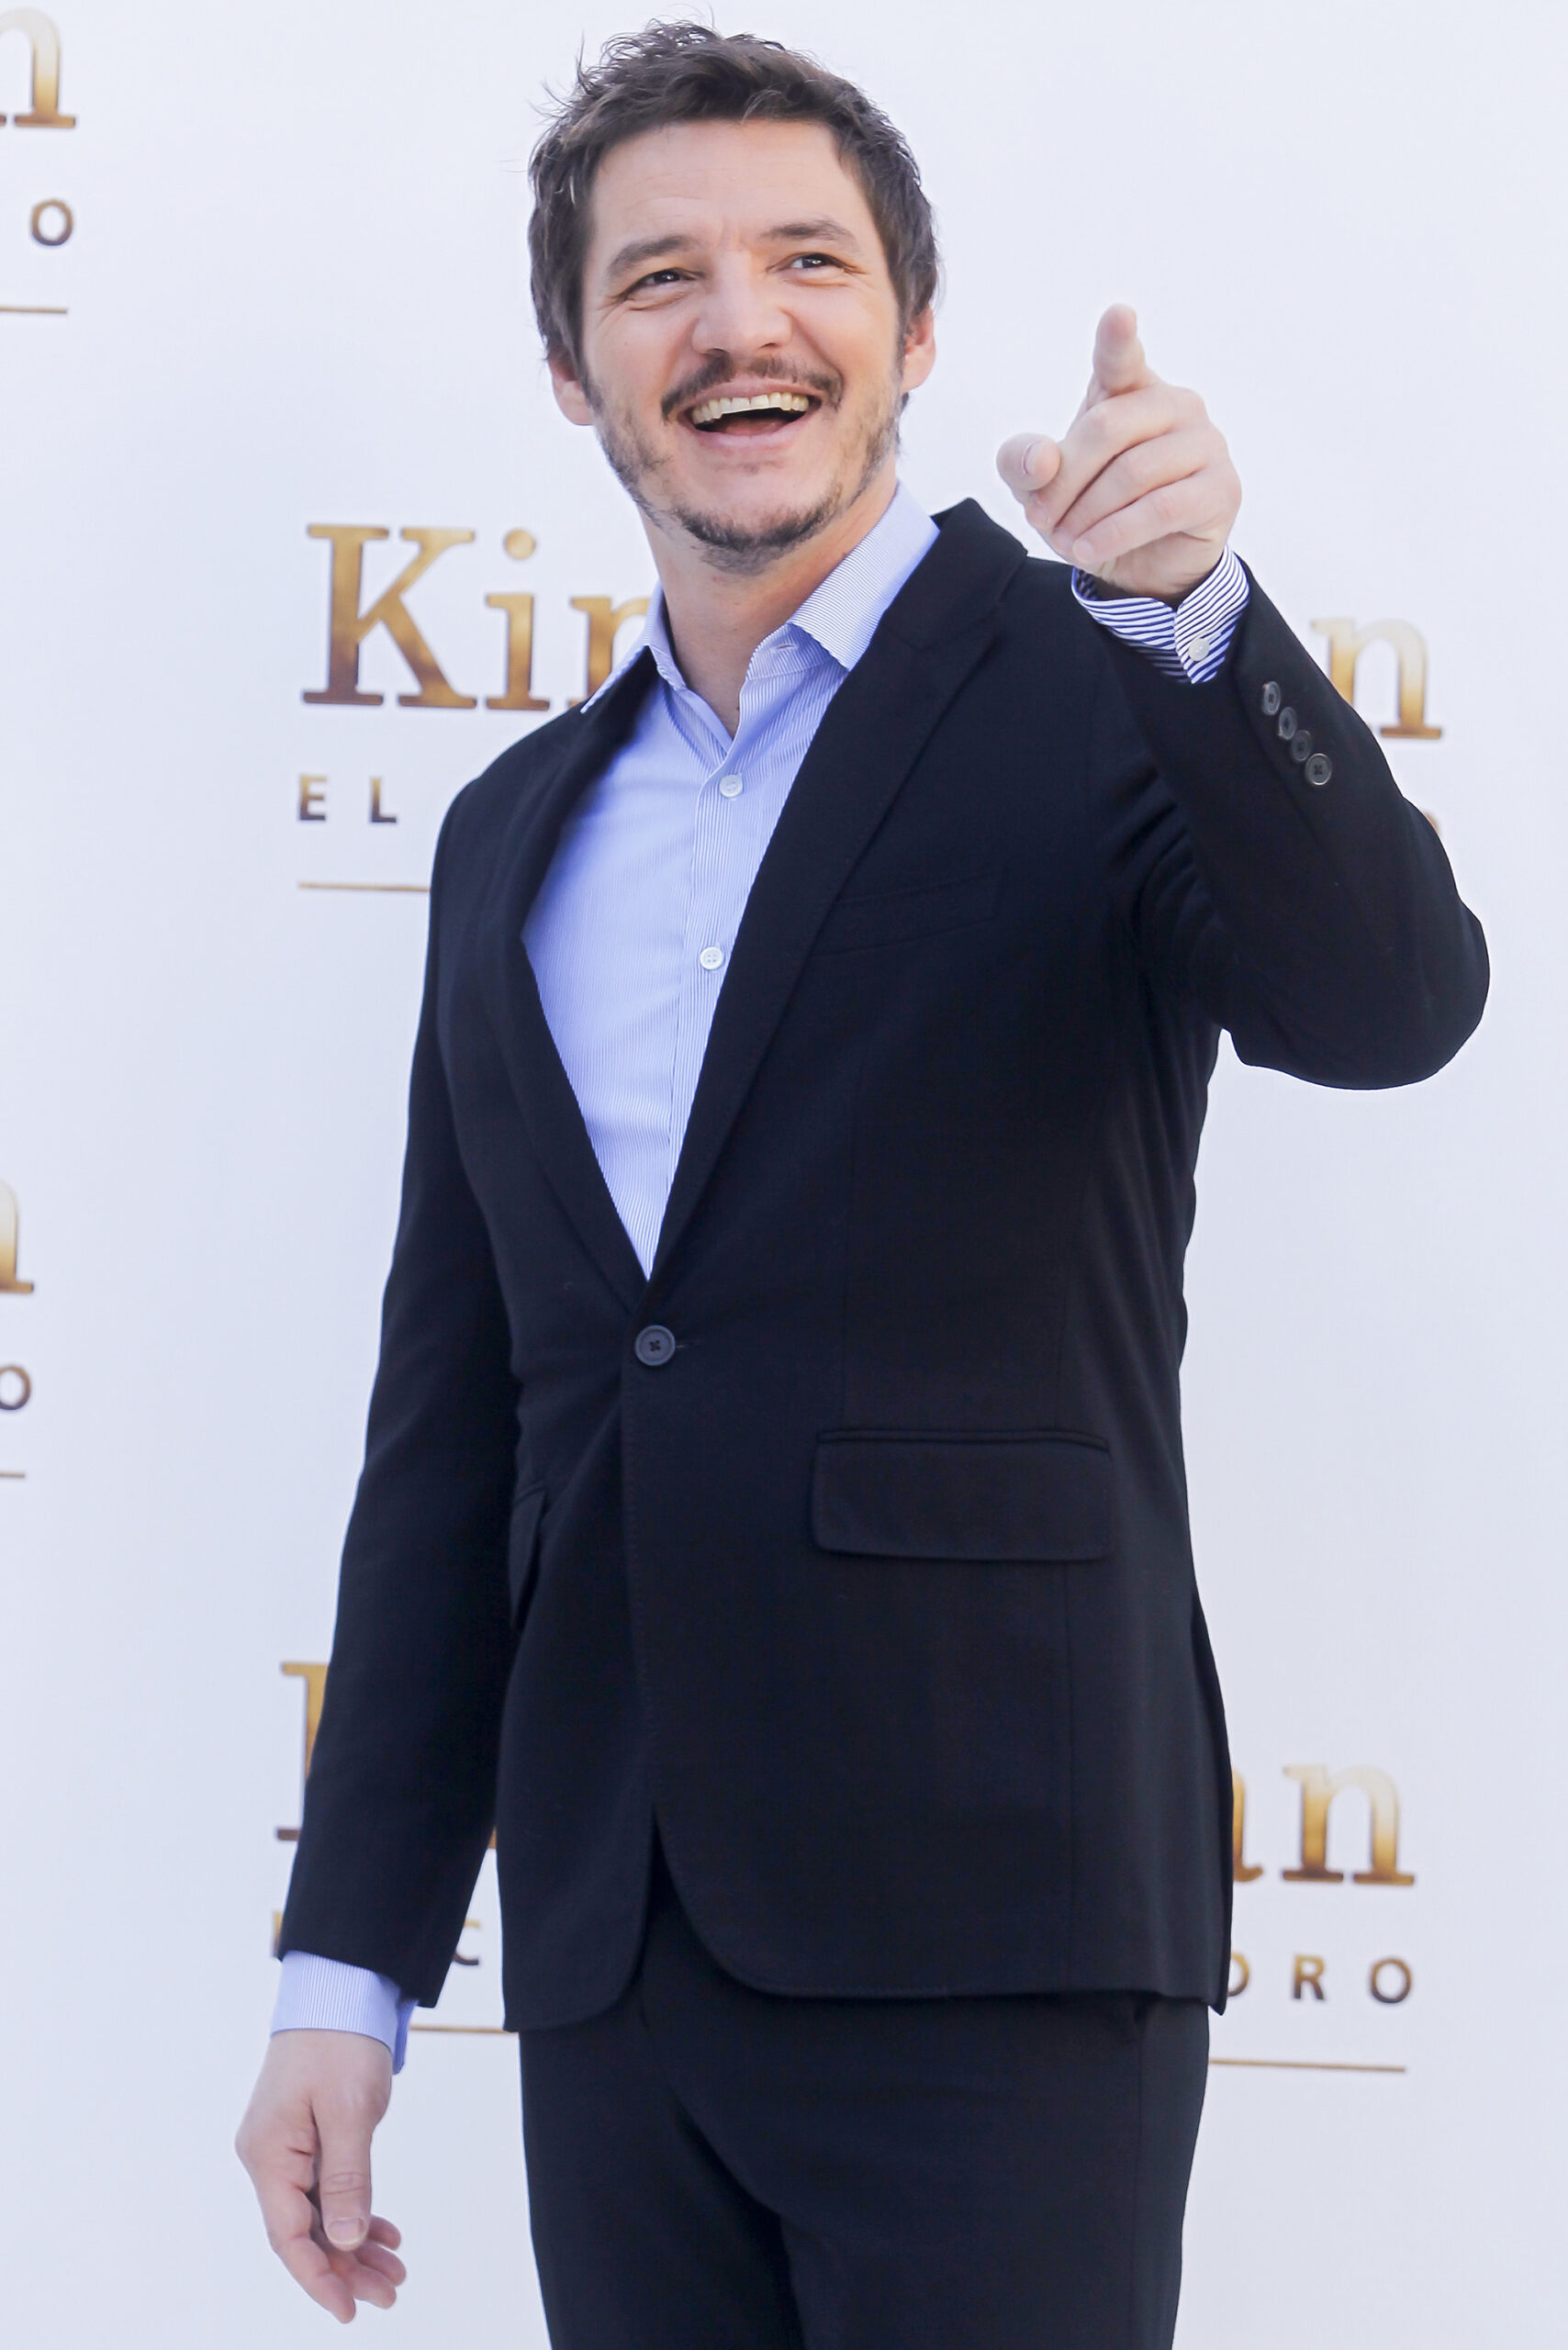 Actor Pedro Pascal smiles and points in front of him, wearing a dark blue suit and a light blue shirt.